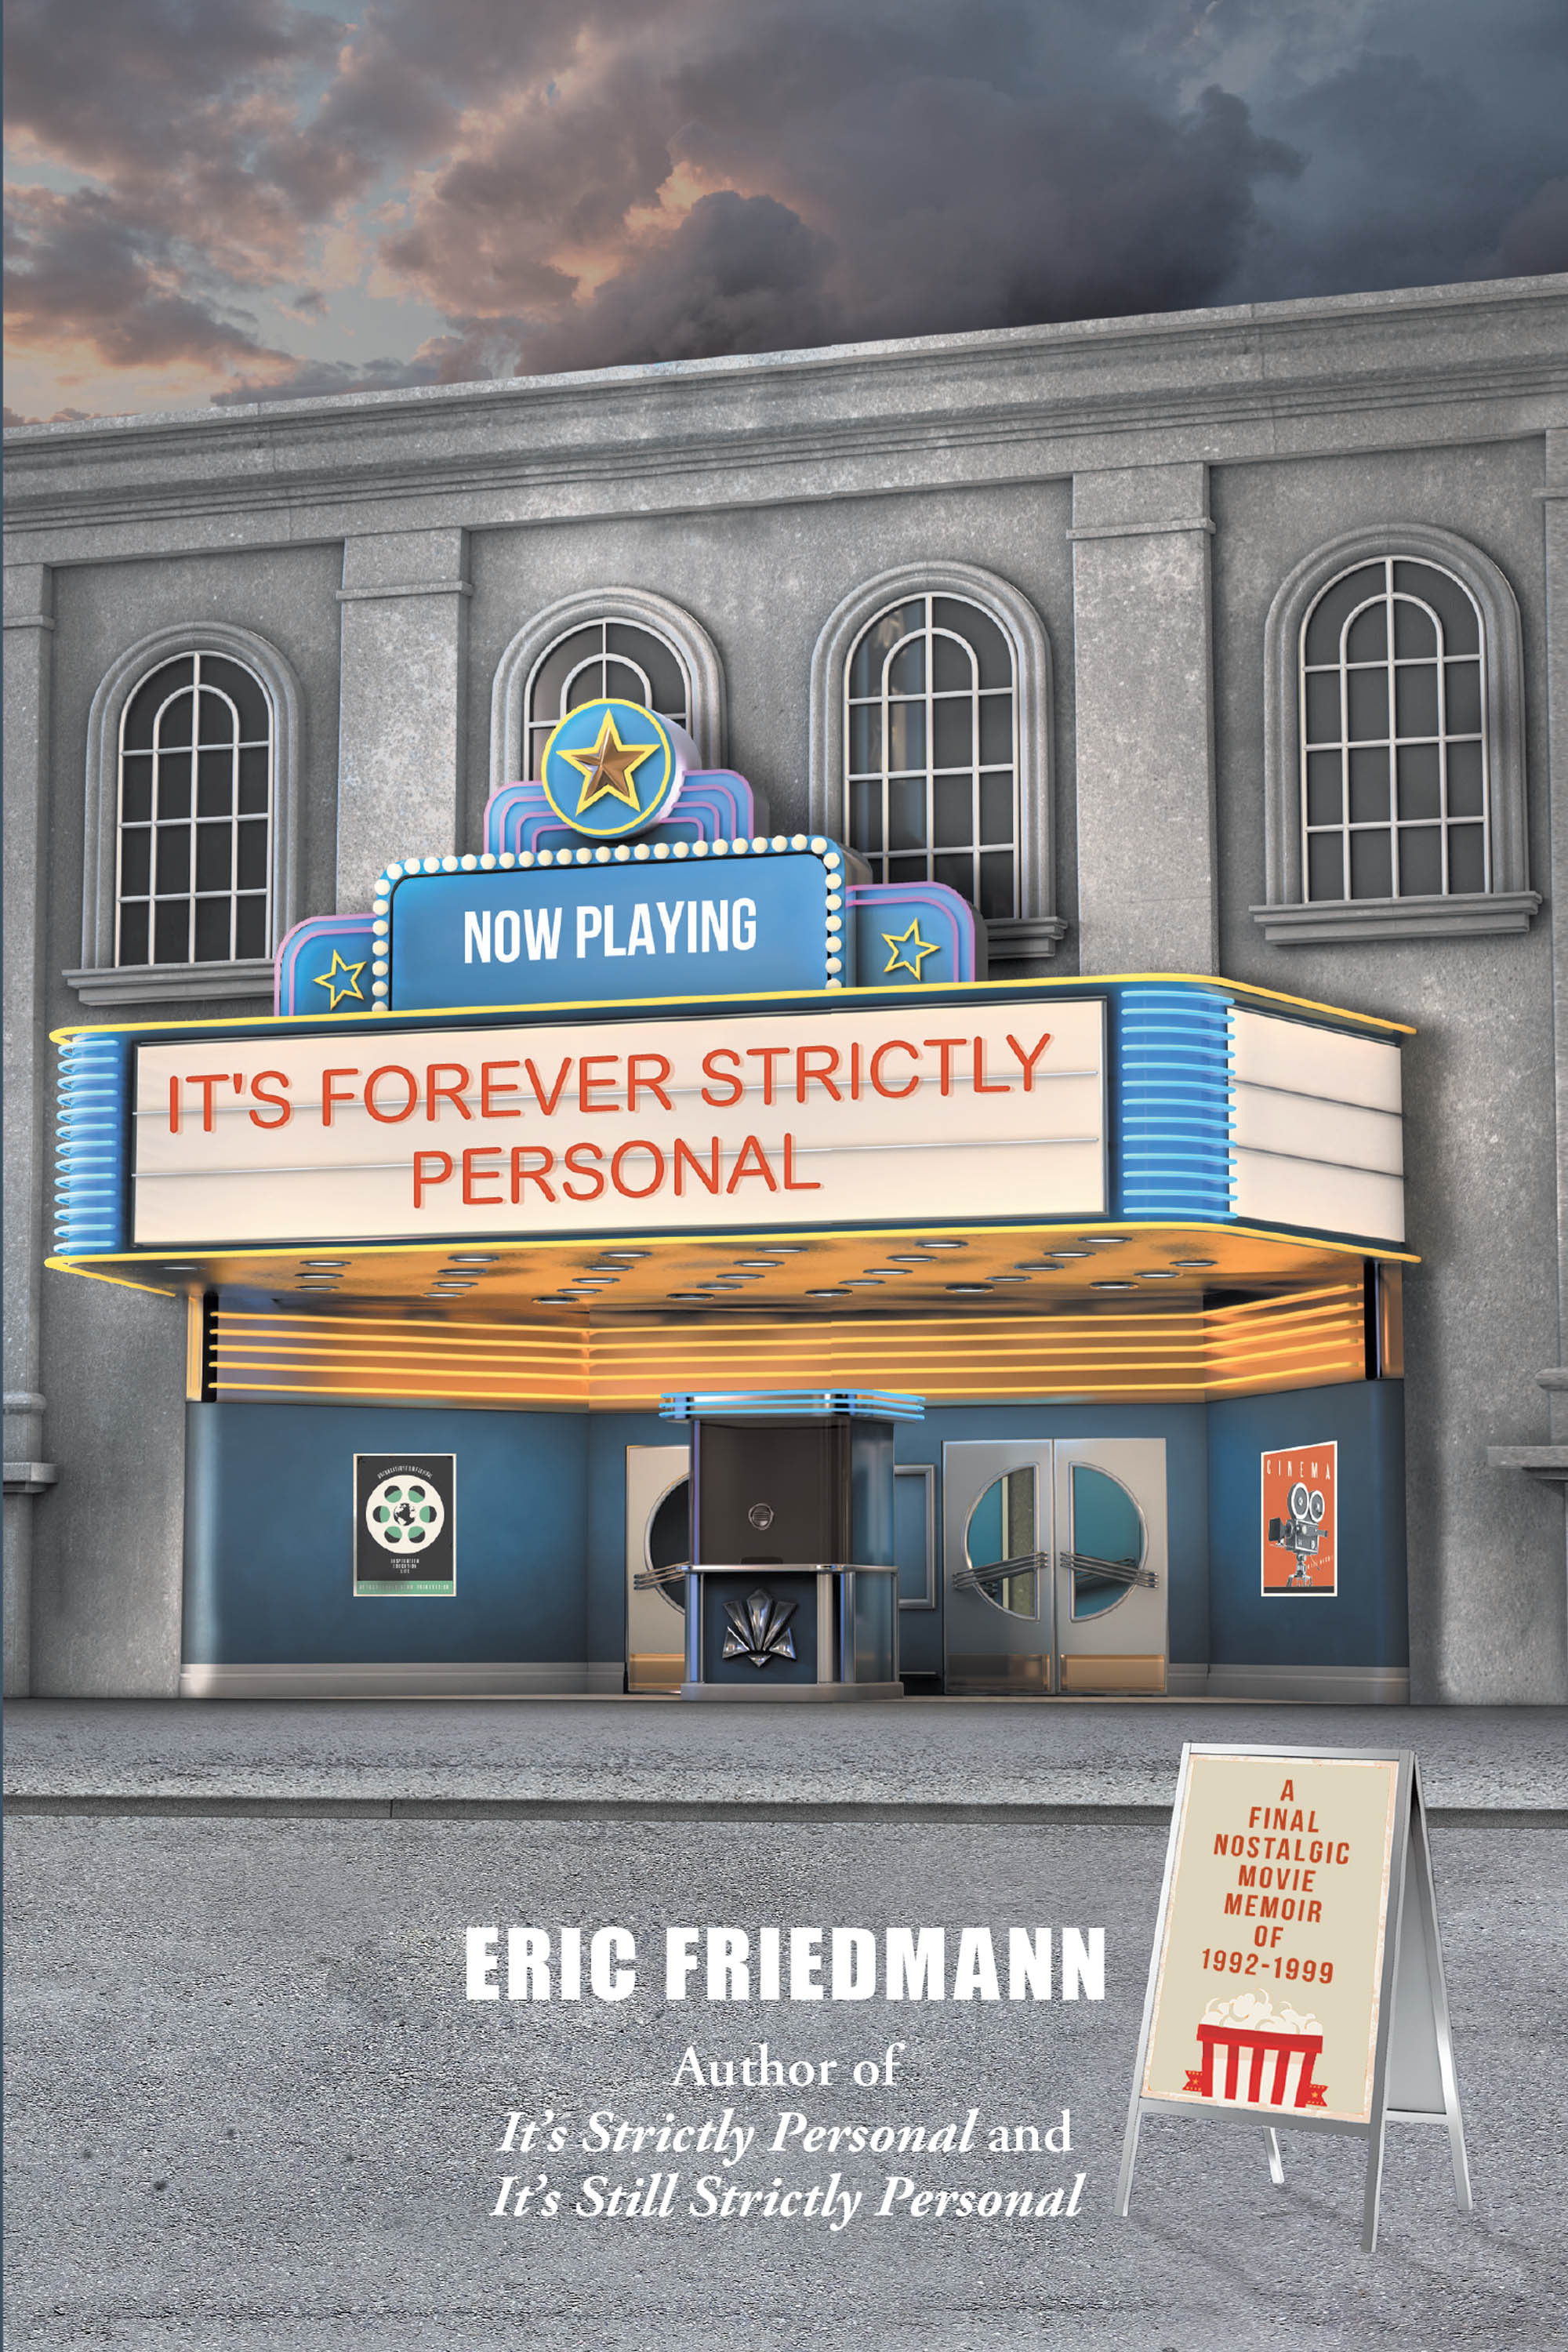 Author Eric Friedmann’s New Book, “IT’S FOREVER STRICTLY PERSONAL: A Final Nostalgic Movie Memoir of 1992-1999,” is the Completion of His Personal Movie Trilogy